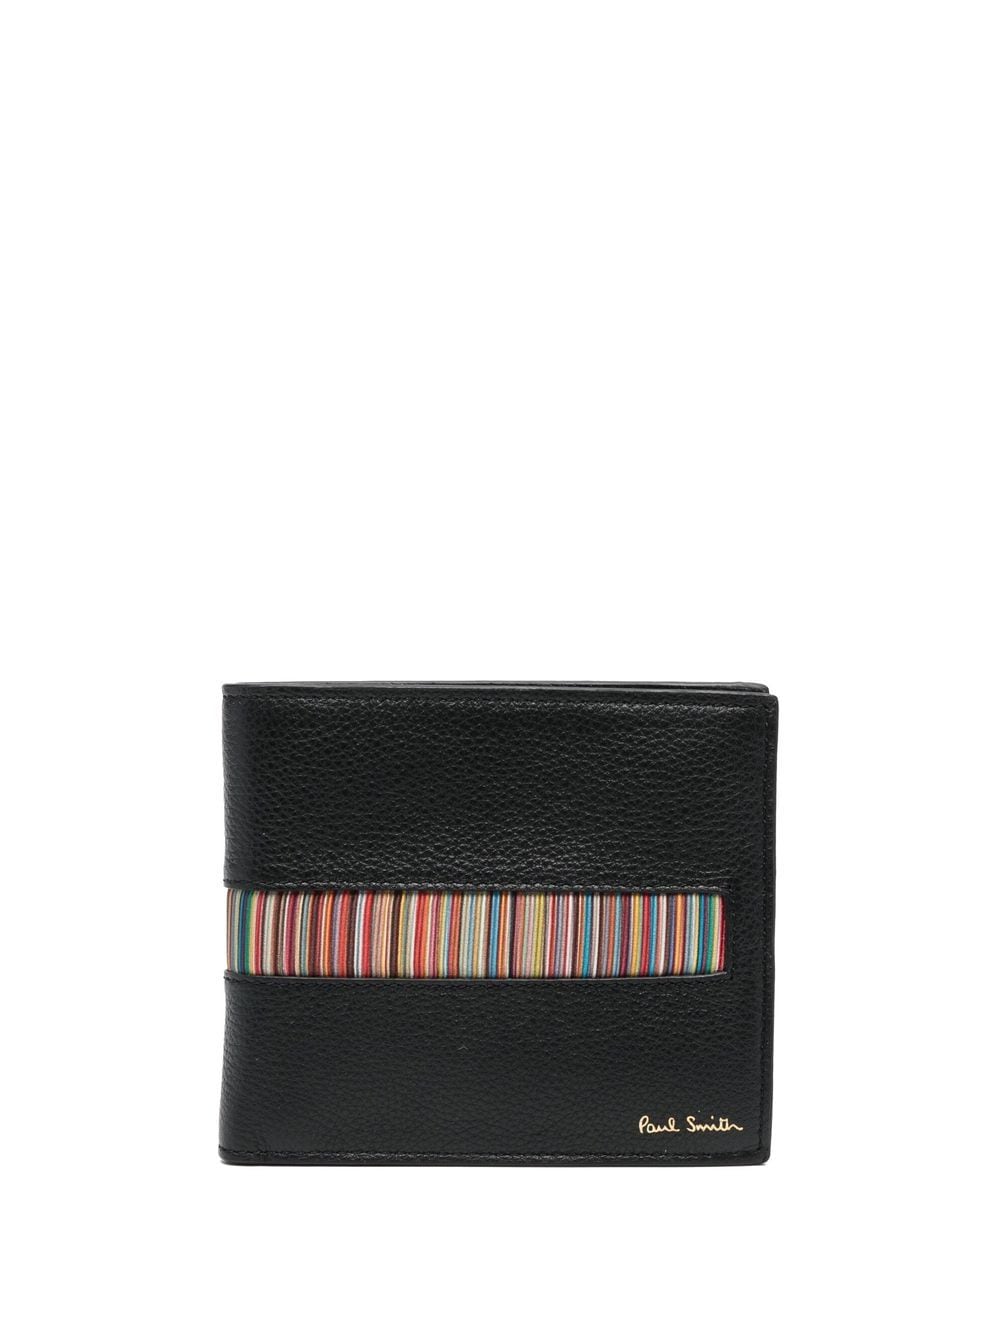 

Paul Smith pebbled-texture leather wallet - Black